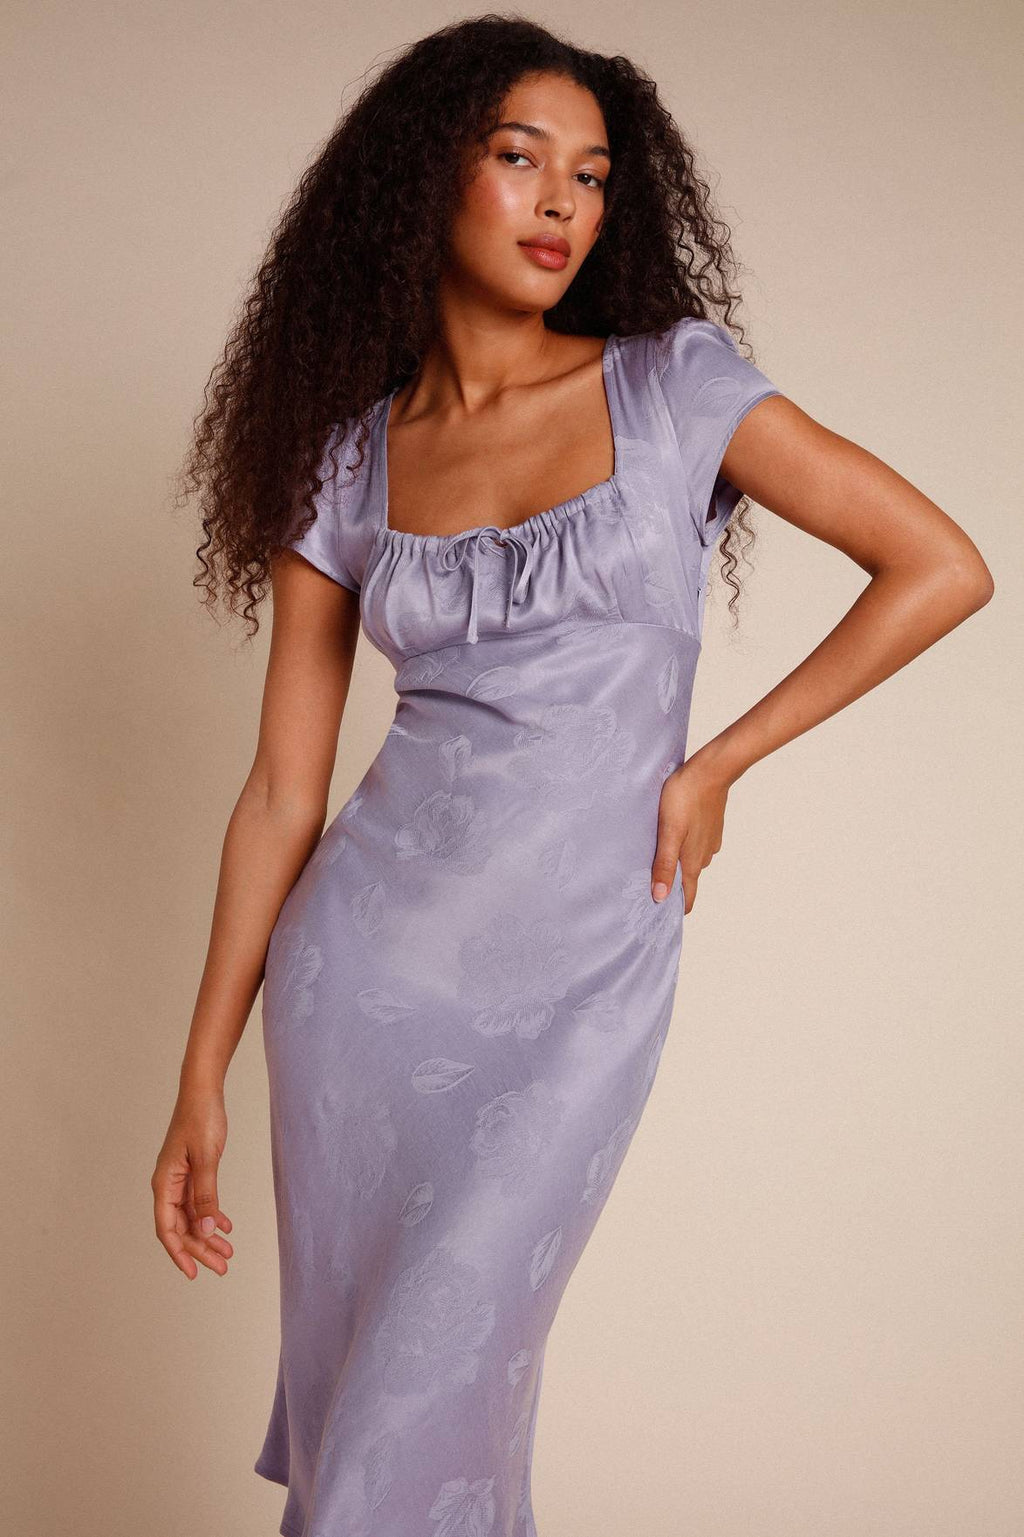 Introducing the versatile Robe Ines. This midi dress features a flattering gathered design on the chest with a unique knot detail. Its bias cut adds a touch of elegance, while the side zipper ensures a perfect fit. Available in lilac jacquard, this dress is the perfect addition to your wardrobe.